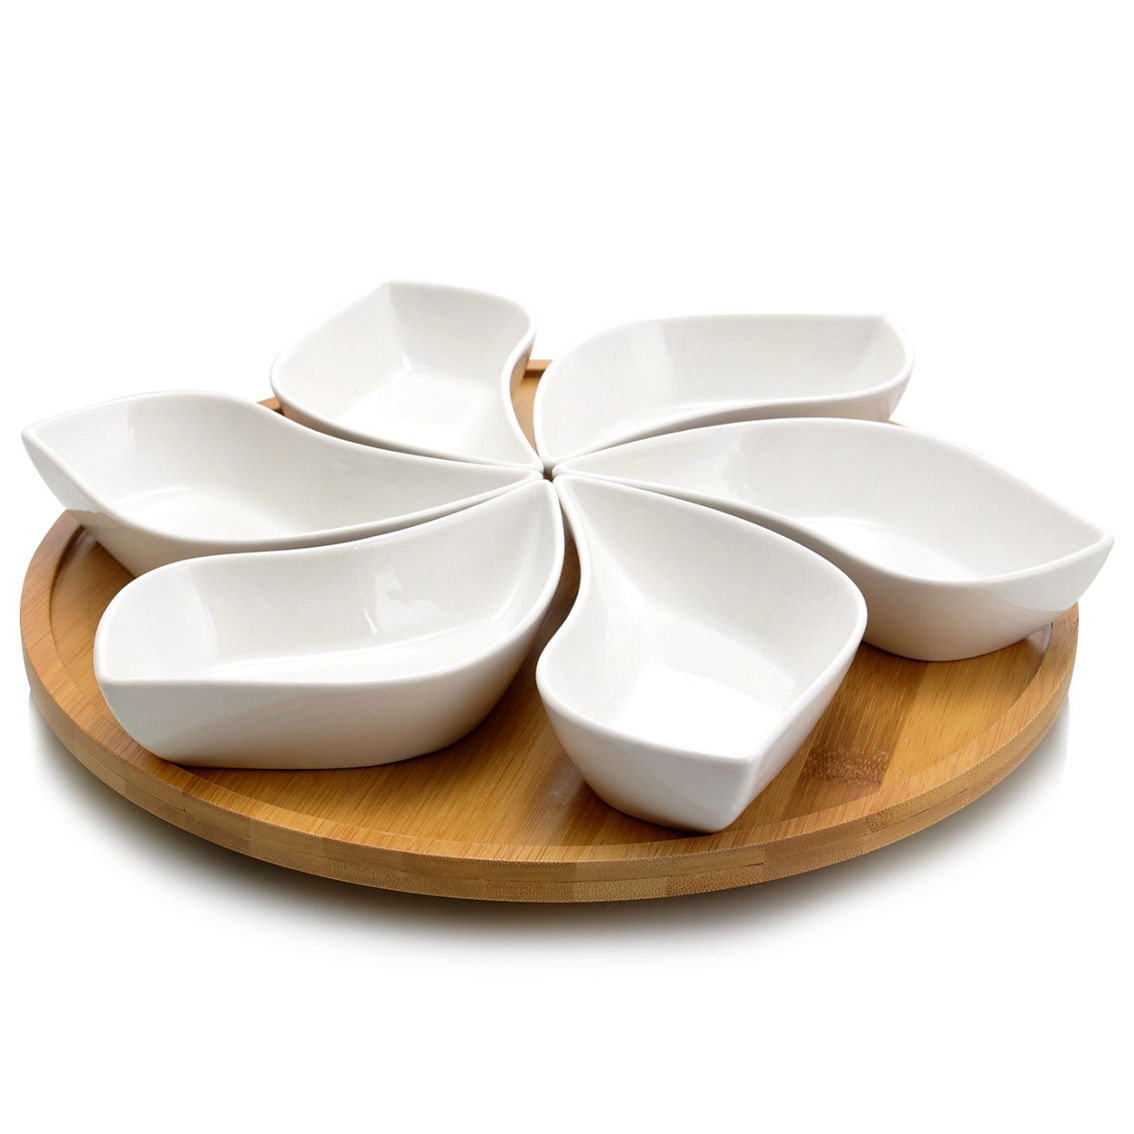 Elama Signature Modern 13.5 Inch 7pc Lazy Susan Appetizer and Condiment Server S - Image 5 of 5